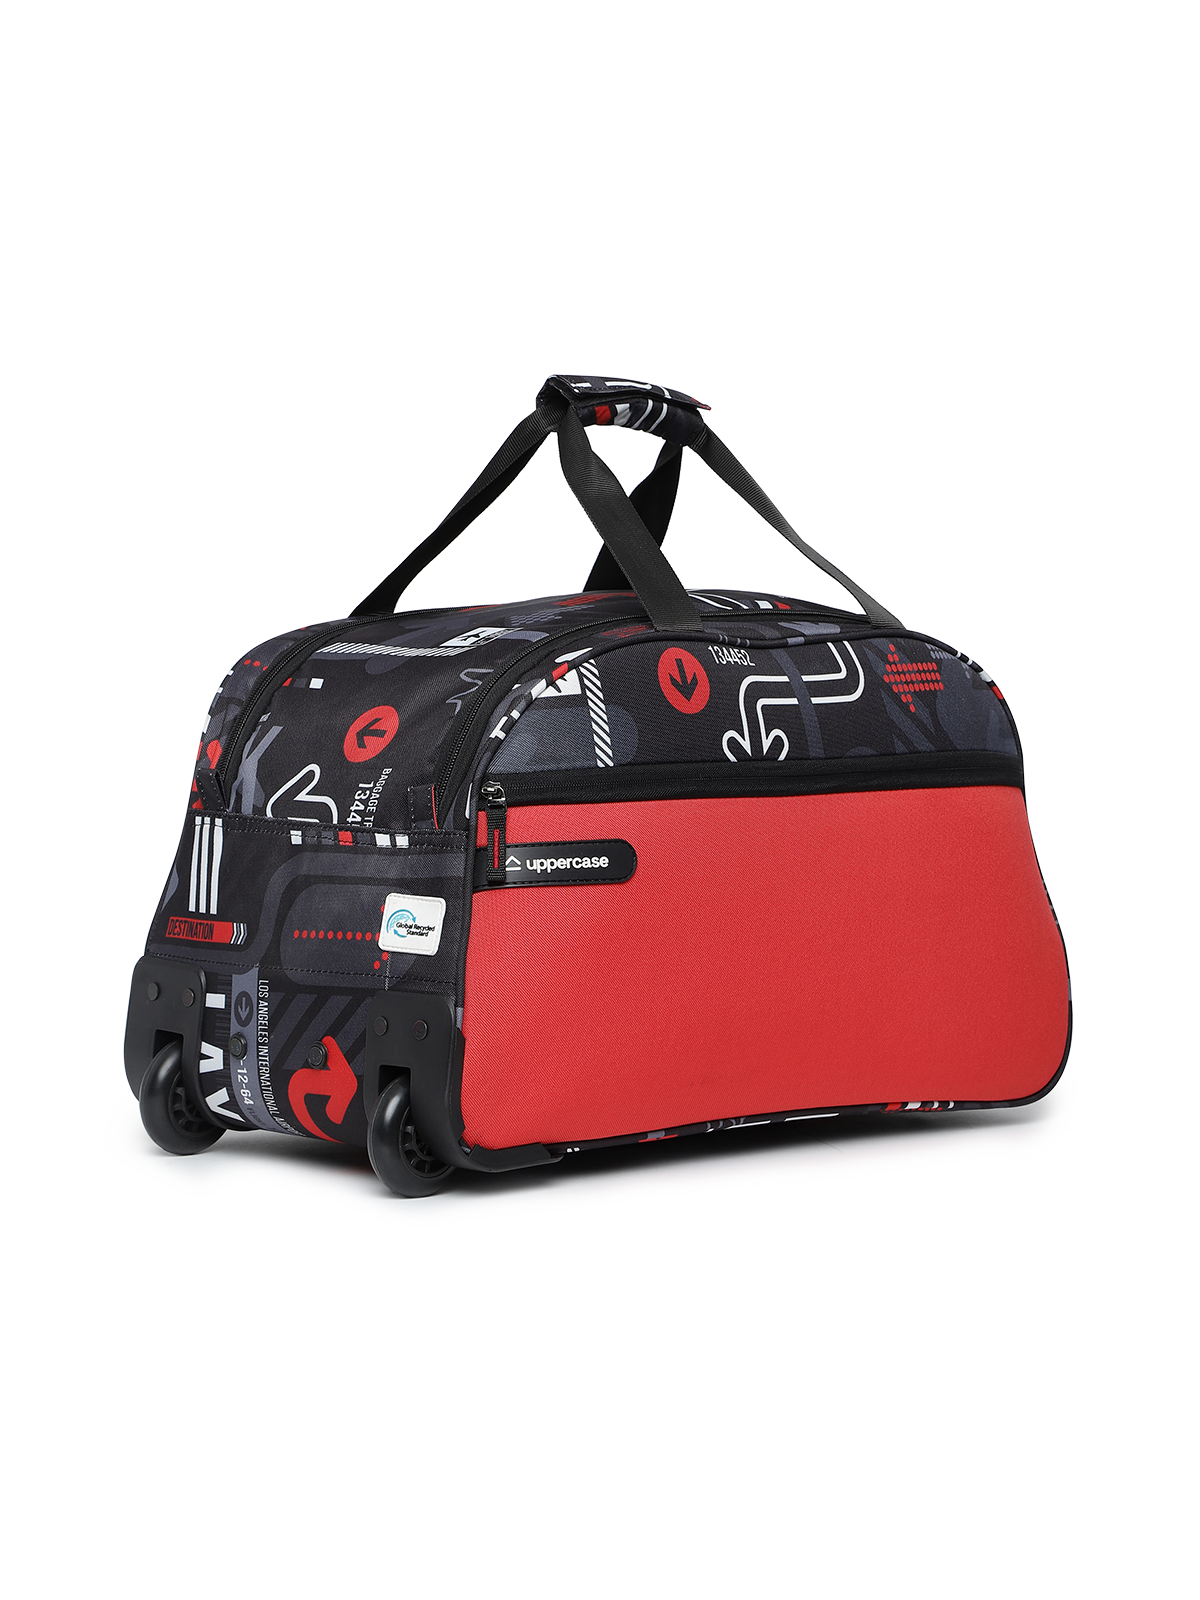 uppercase JFK 52 Duffle Trolley Bag | Dust Resistant Travel Bag | Spacious Main Compartment | Smooth Wheels | Quick Front Pocket Access | Duffle Bag for Women & Men | 1500 Days Warranty (Red)